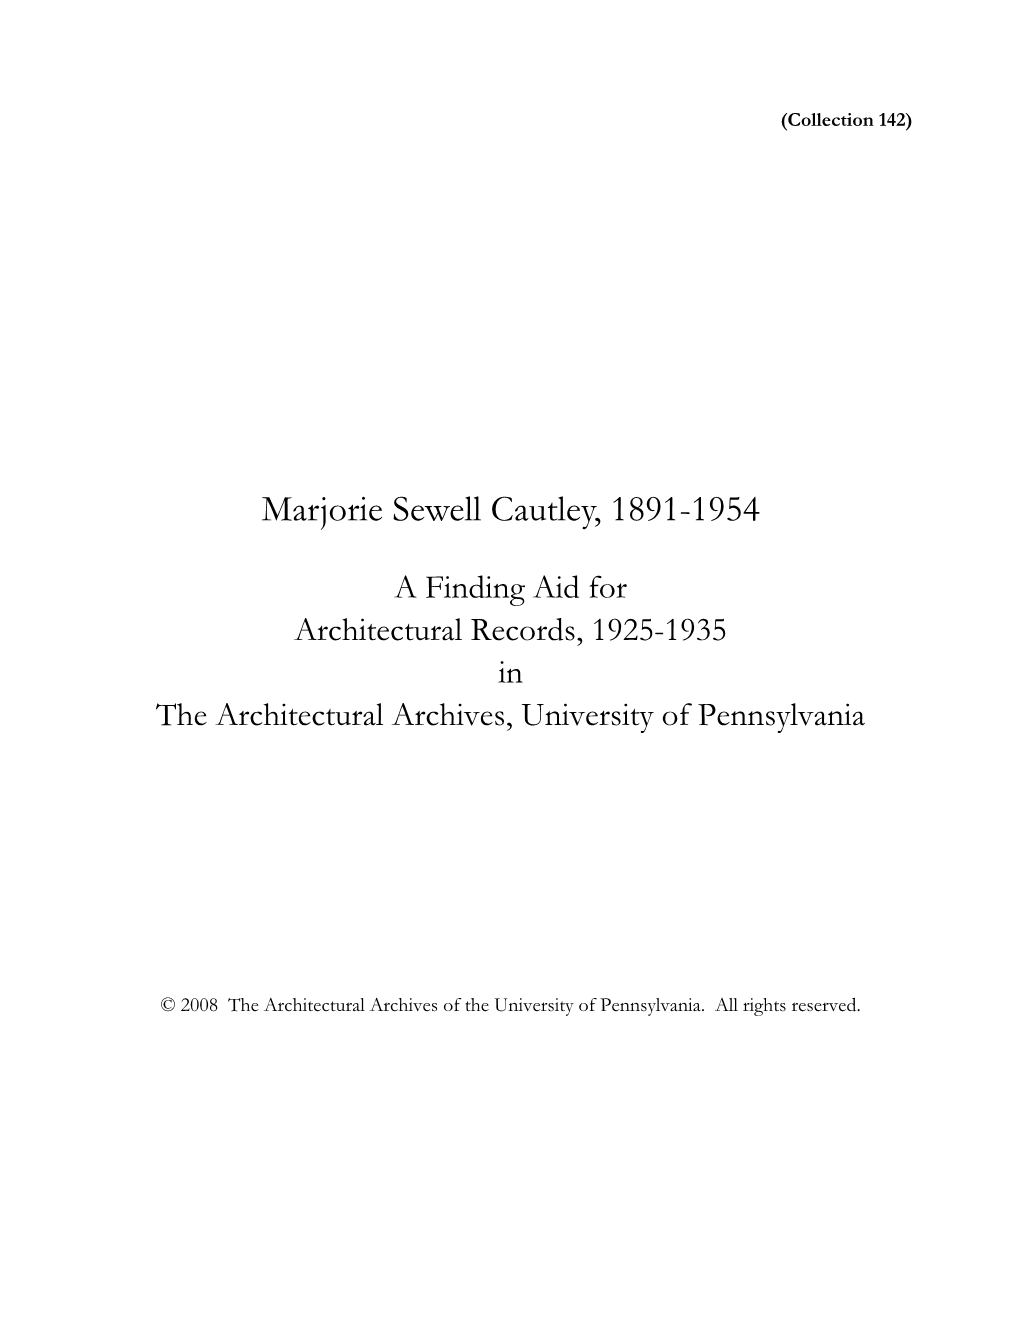 Finding Aid for Marjorie Sewell Cautley Architectural Records, 1925-1935, in the Architectural Archives, University of Pennsylva